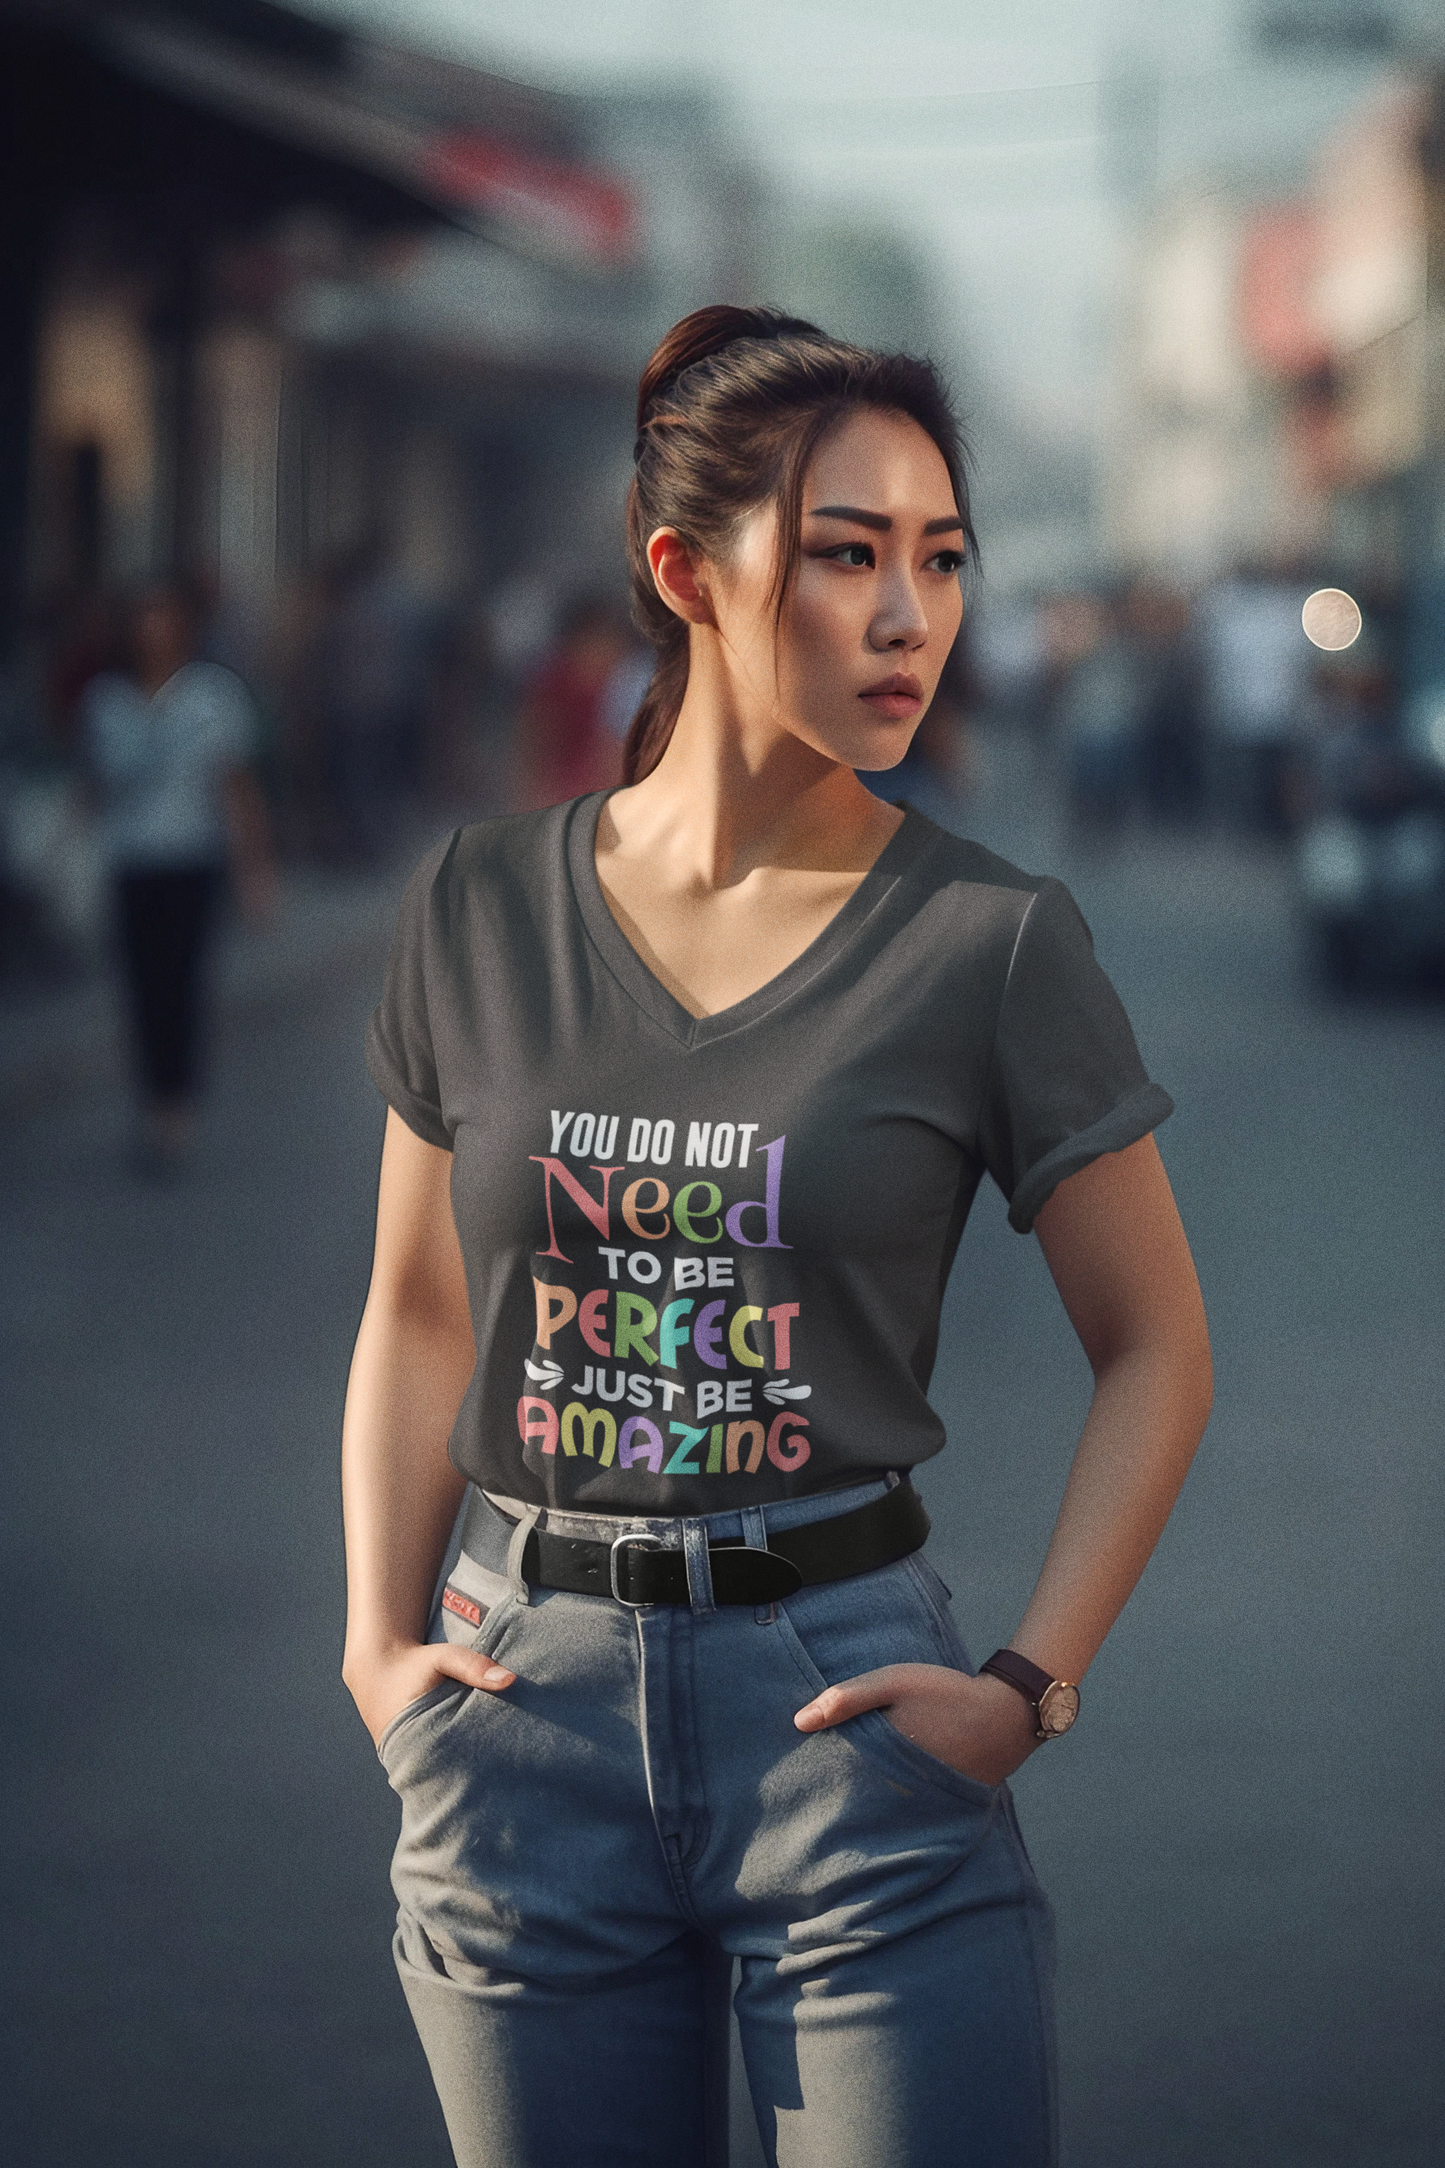 You Do Not Need To Be Perfect Just Be Amazing Women's V-Neck Tee, Amazing shirts, Inspirational shirts, Motivational Shirts, Trendy tees